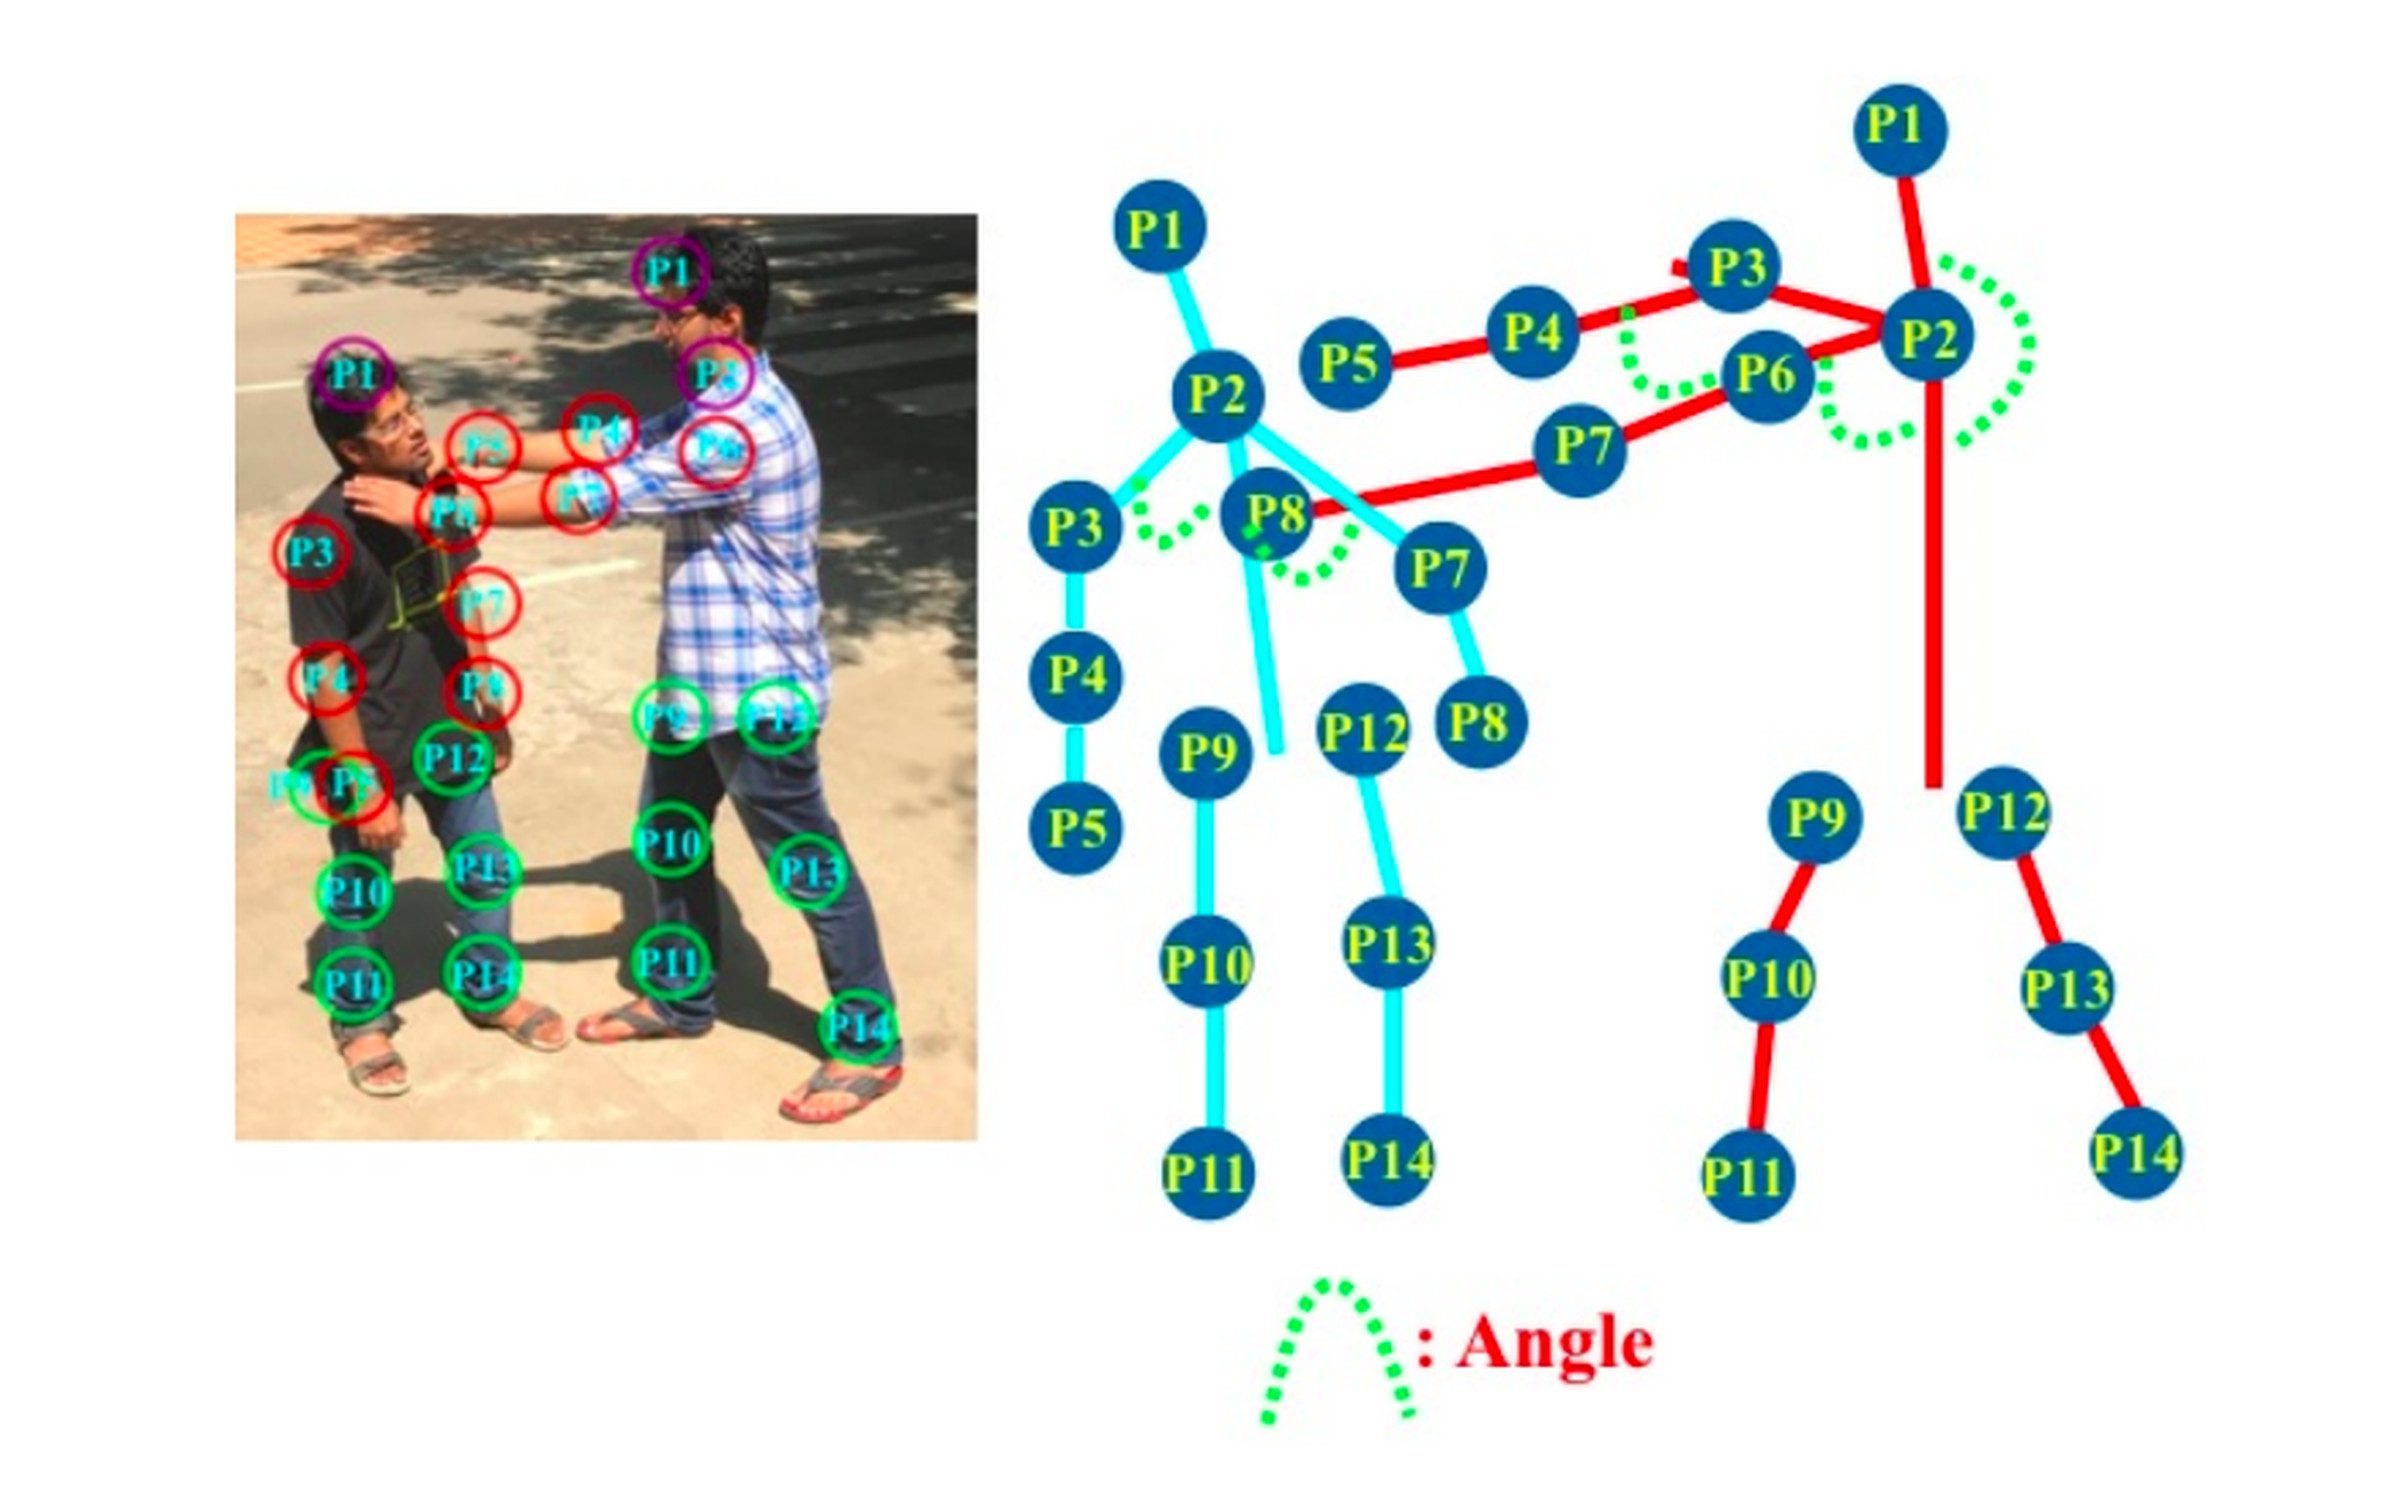 A figure from the paper showing how the software analyzes individuals poses and matches them to “violent” postures.